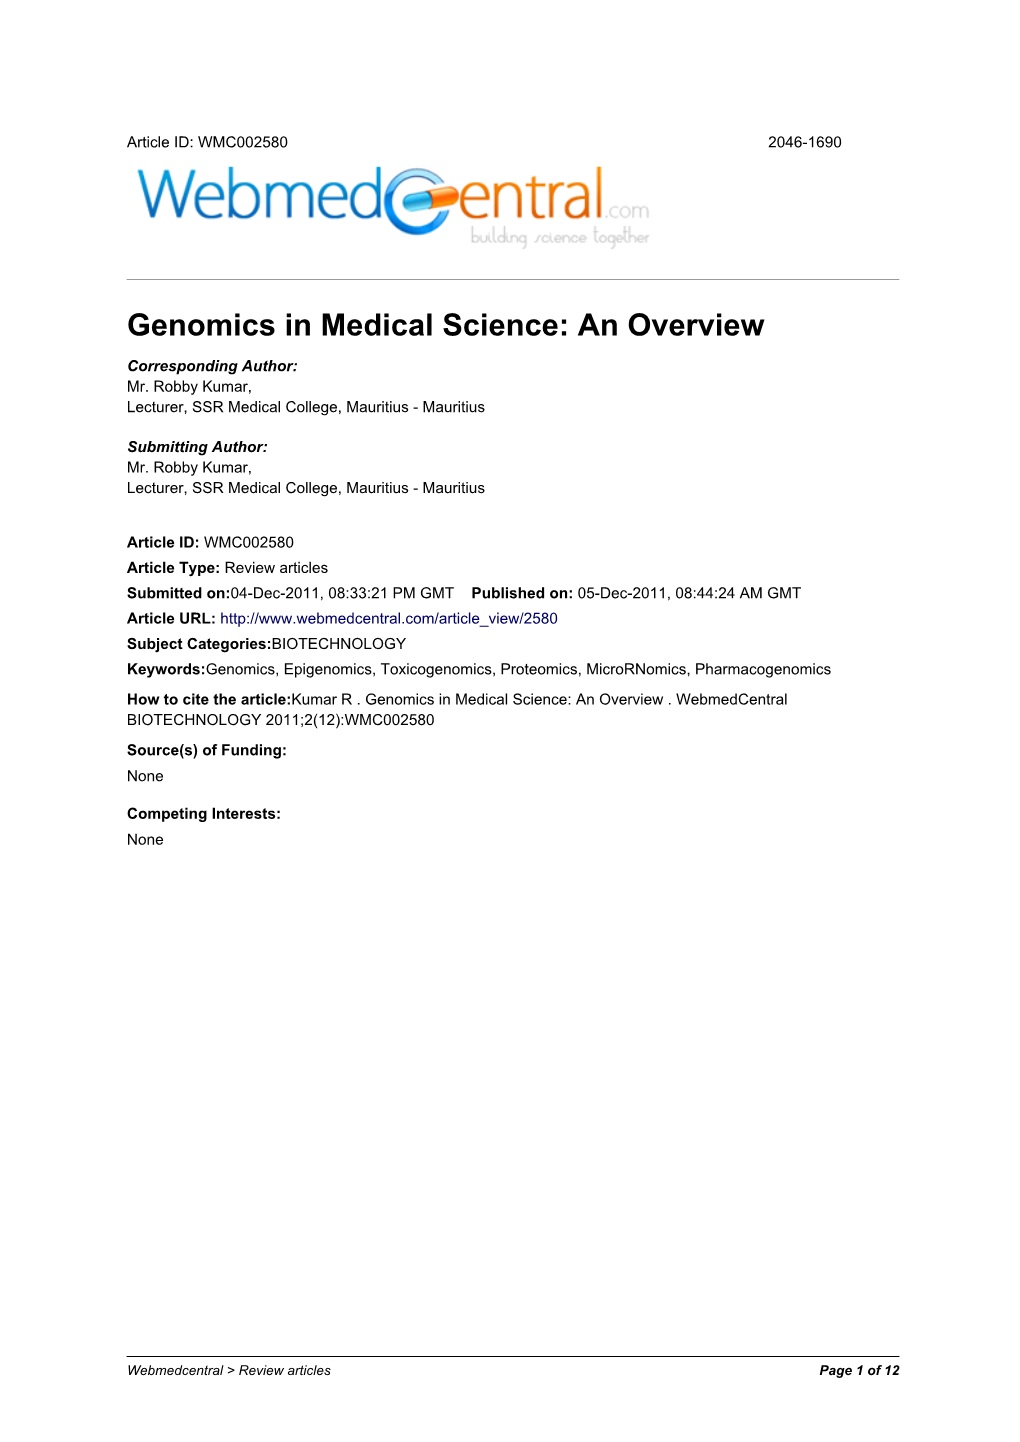 Genomics in Medical Science: an Overview